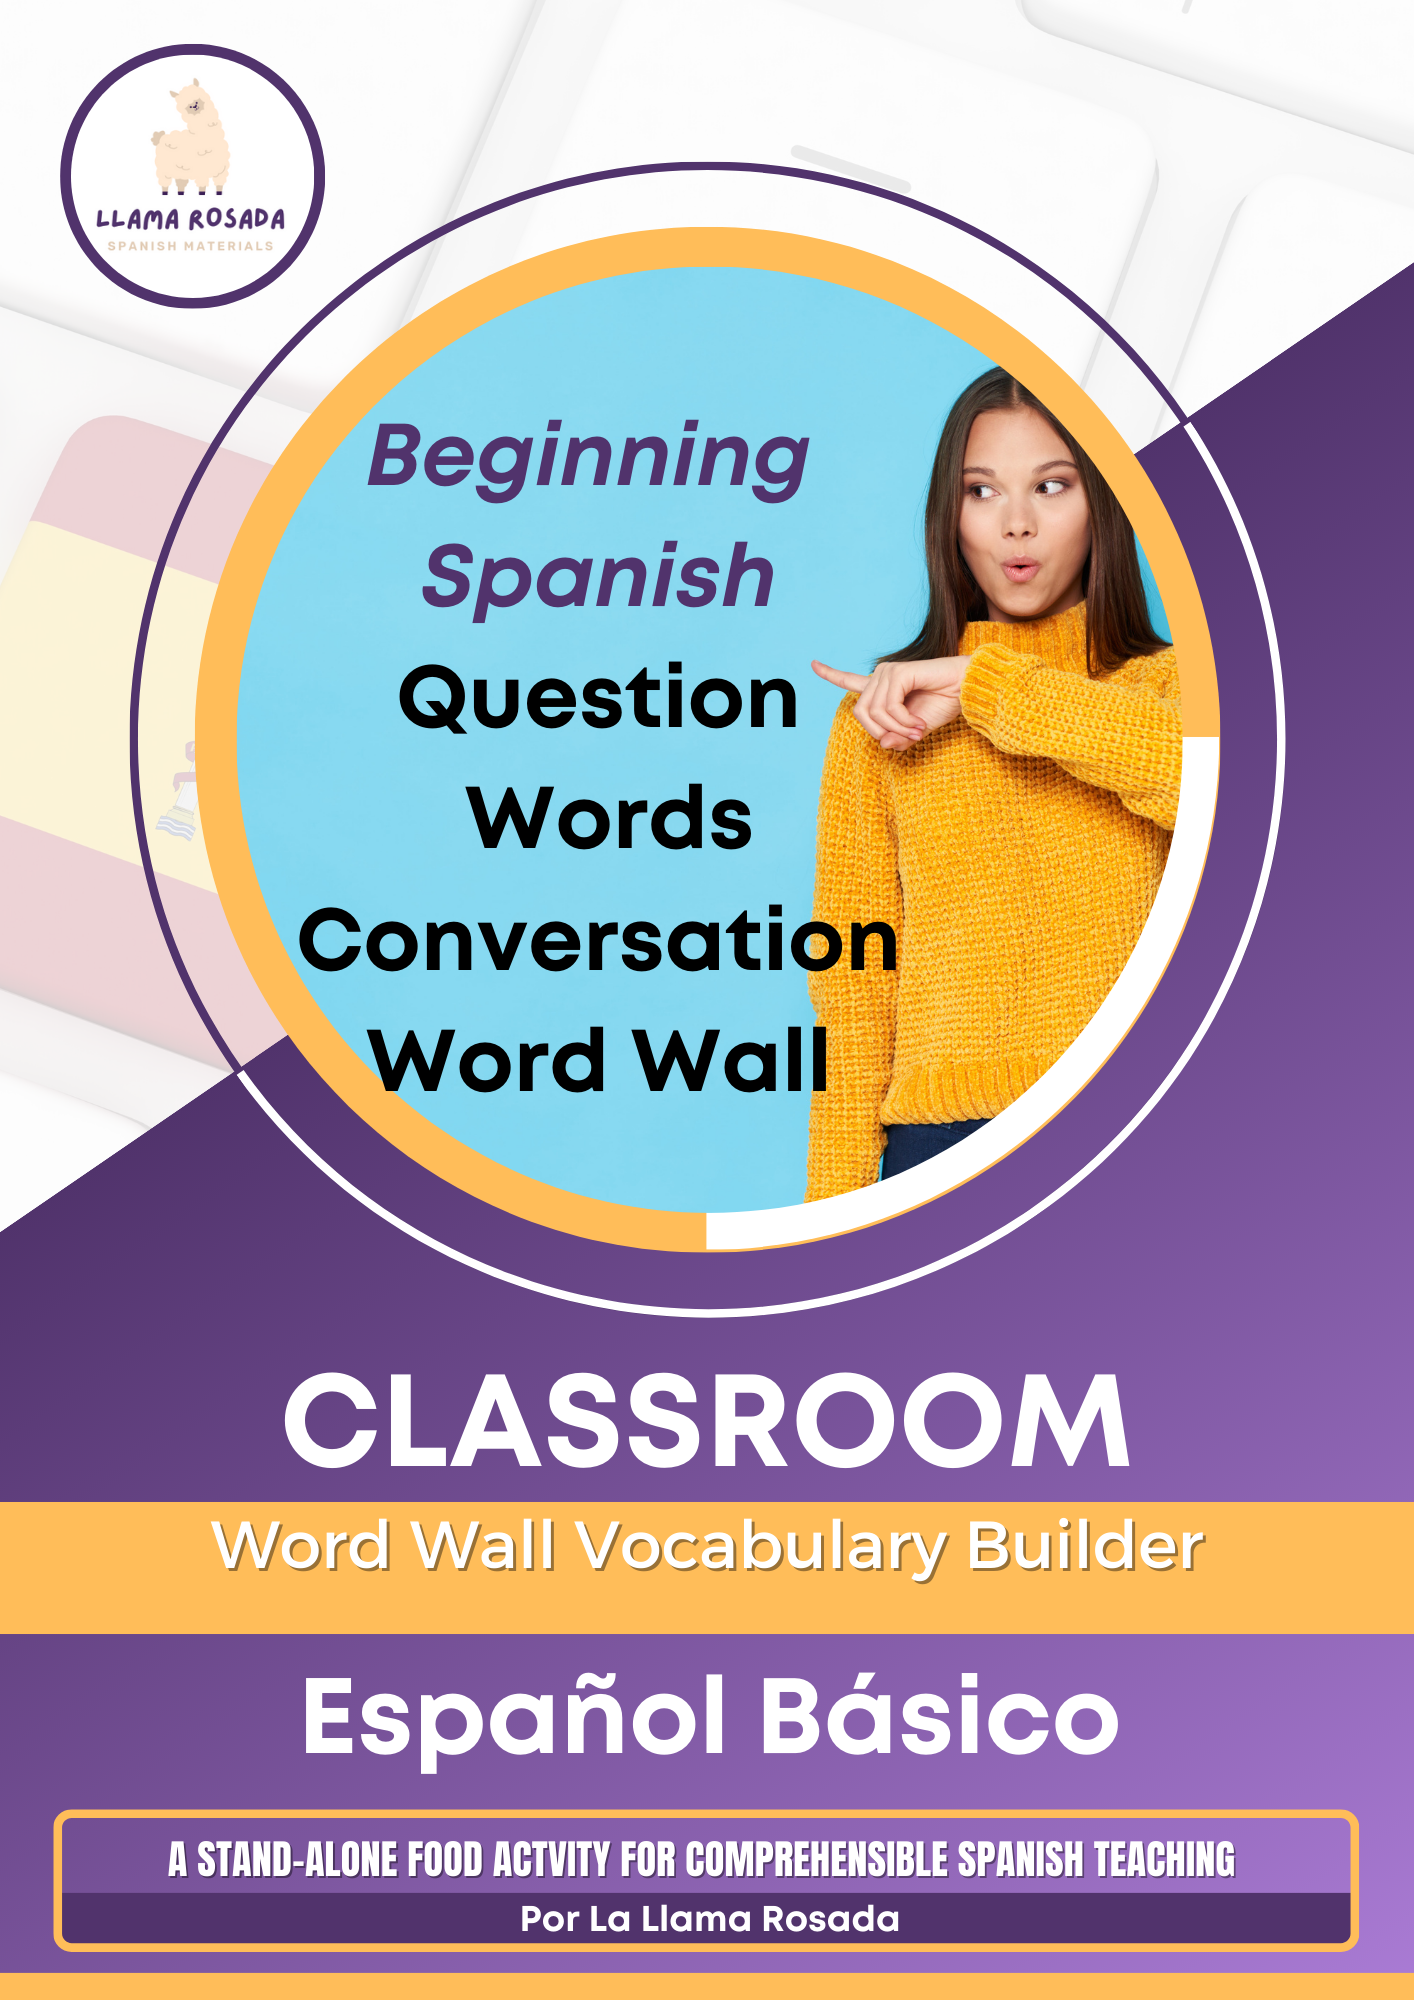 beg-spanish-classroom-questions-word-wall-for-conversation-kris-maze